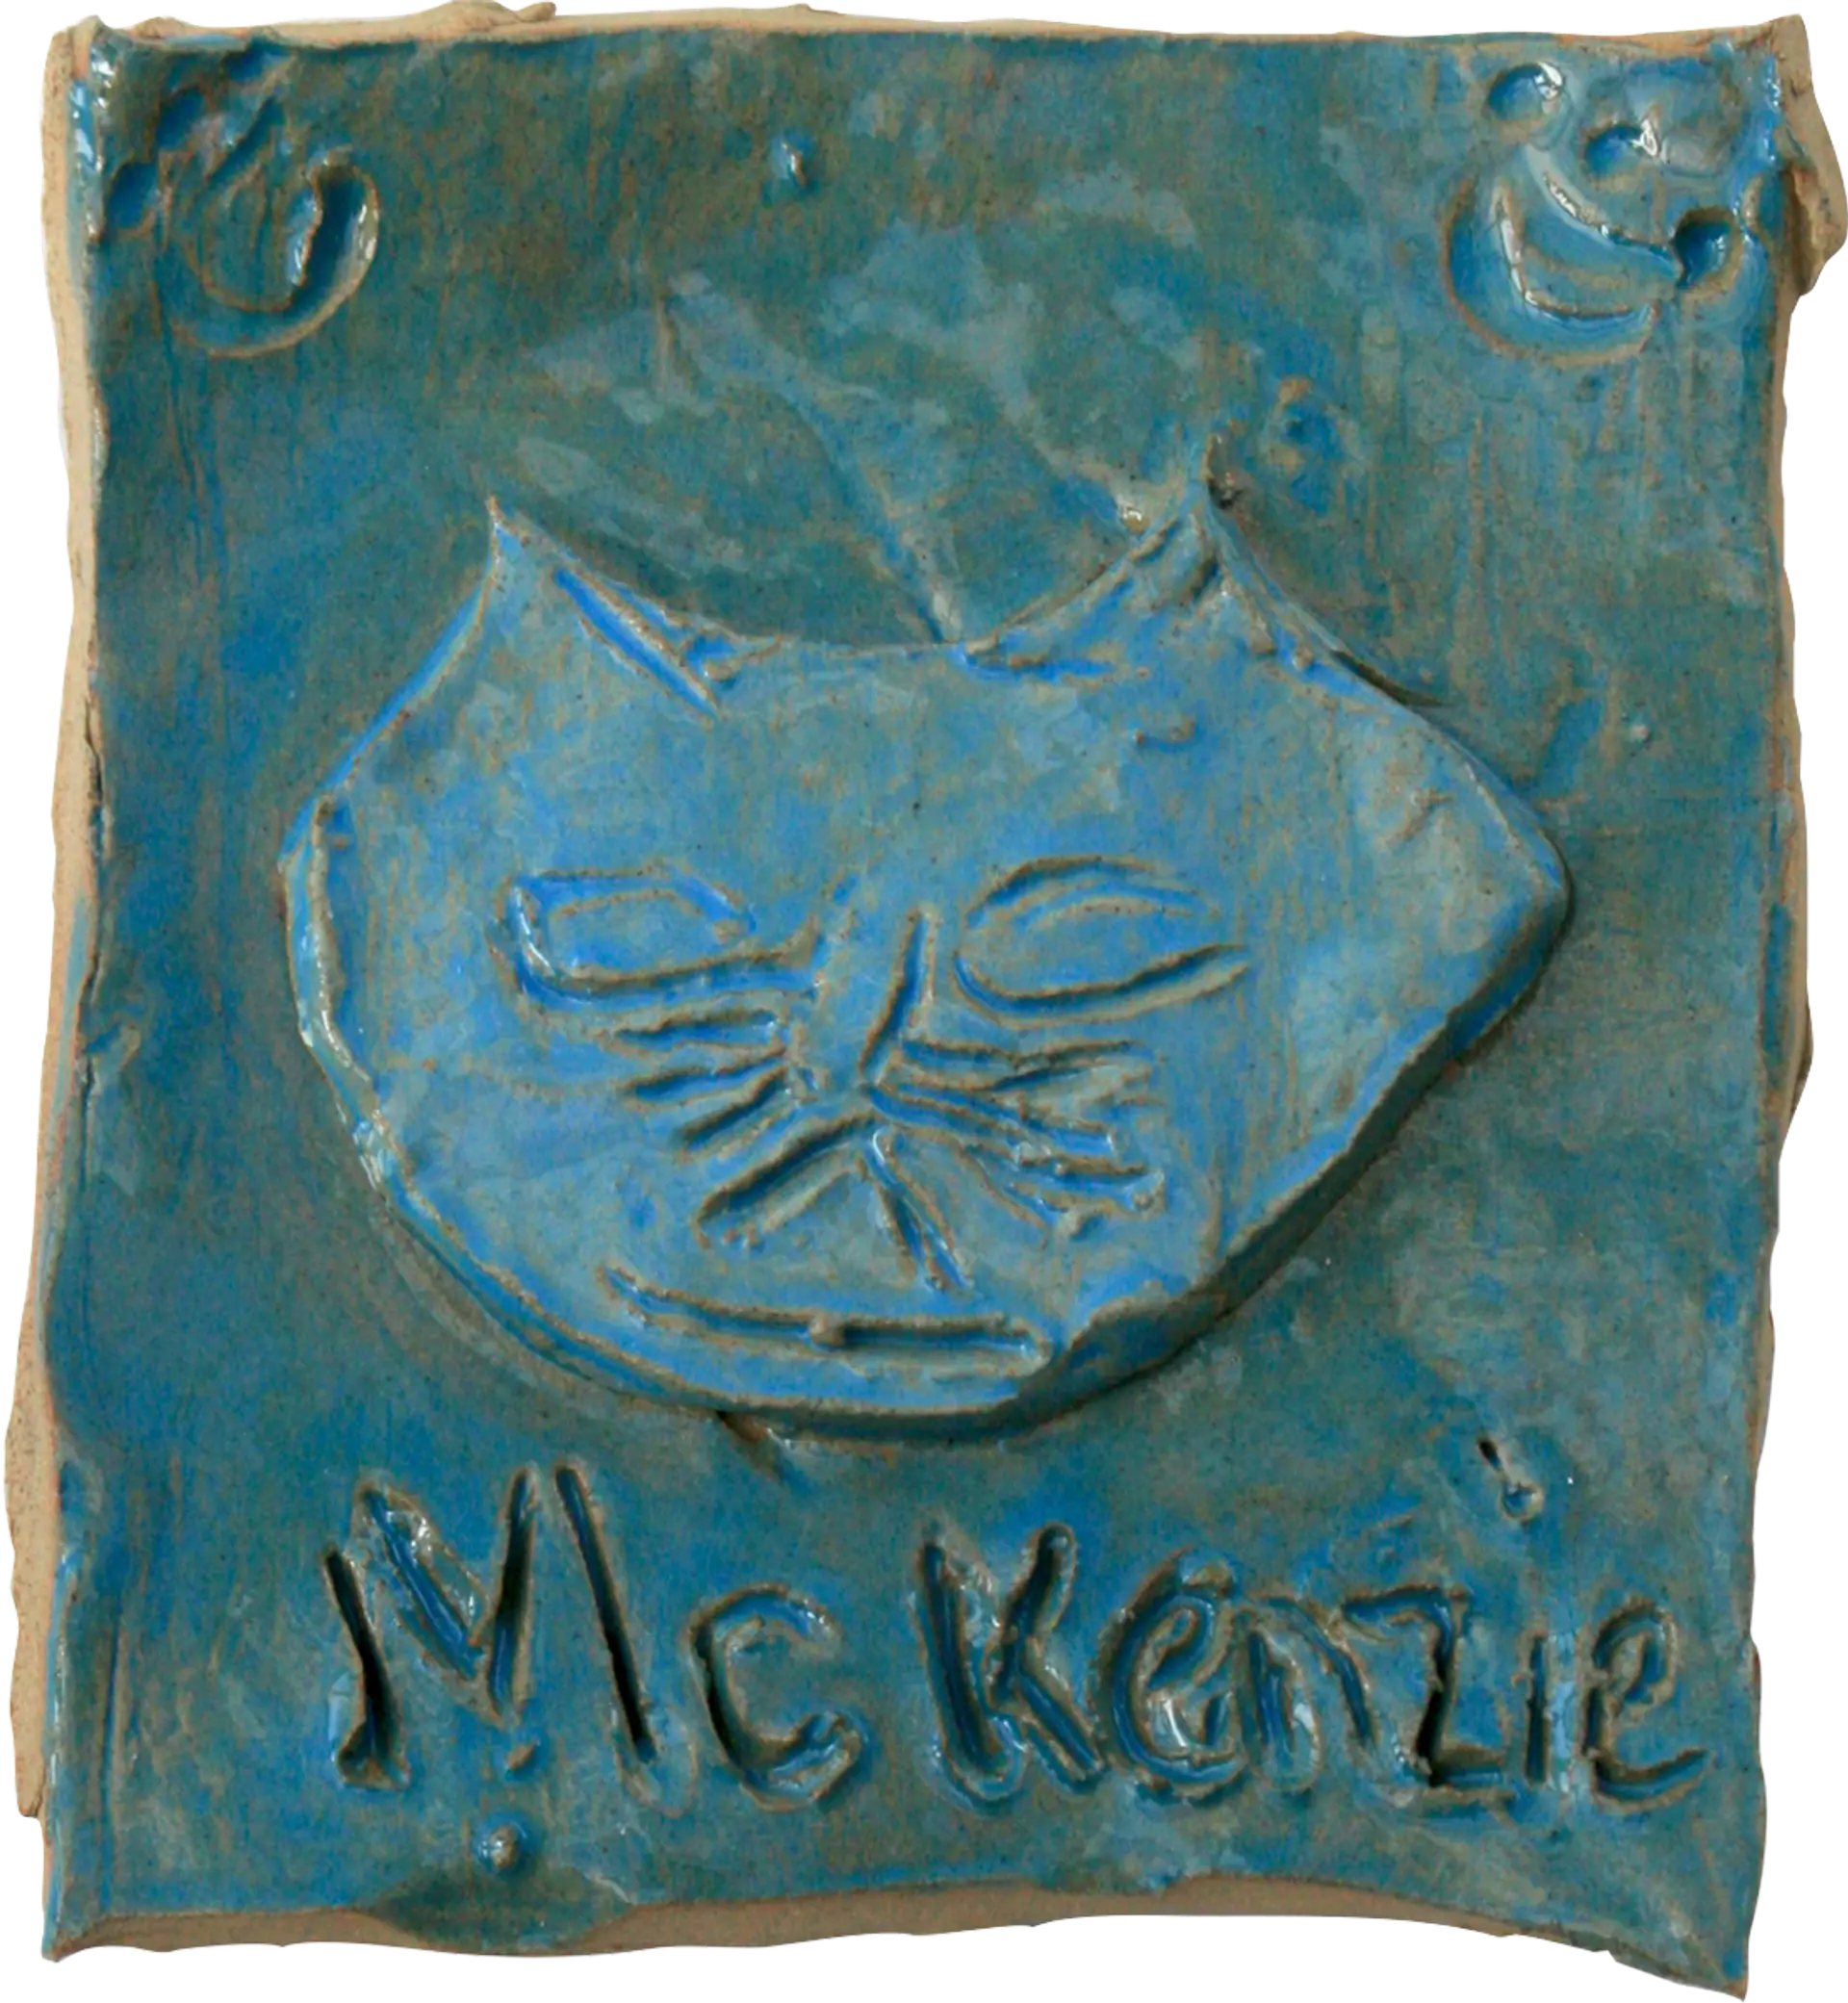 A blue glazed ceramic tile of Mckenzie, Lauren’s pet cat. His name is written at the bottom of the tile, and paw prints decorate the top corners. 